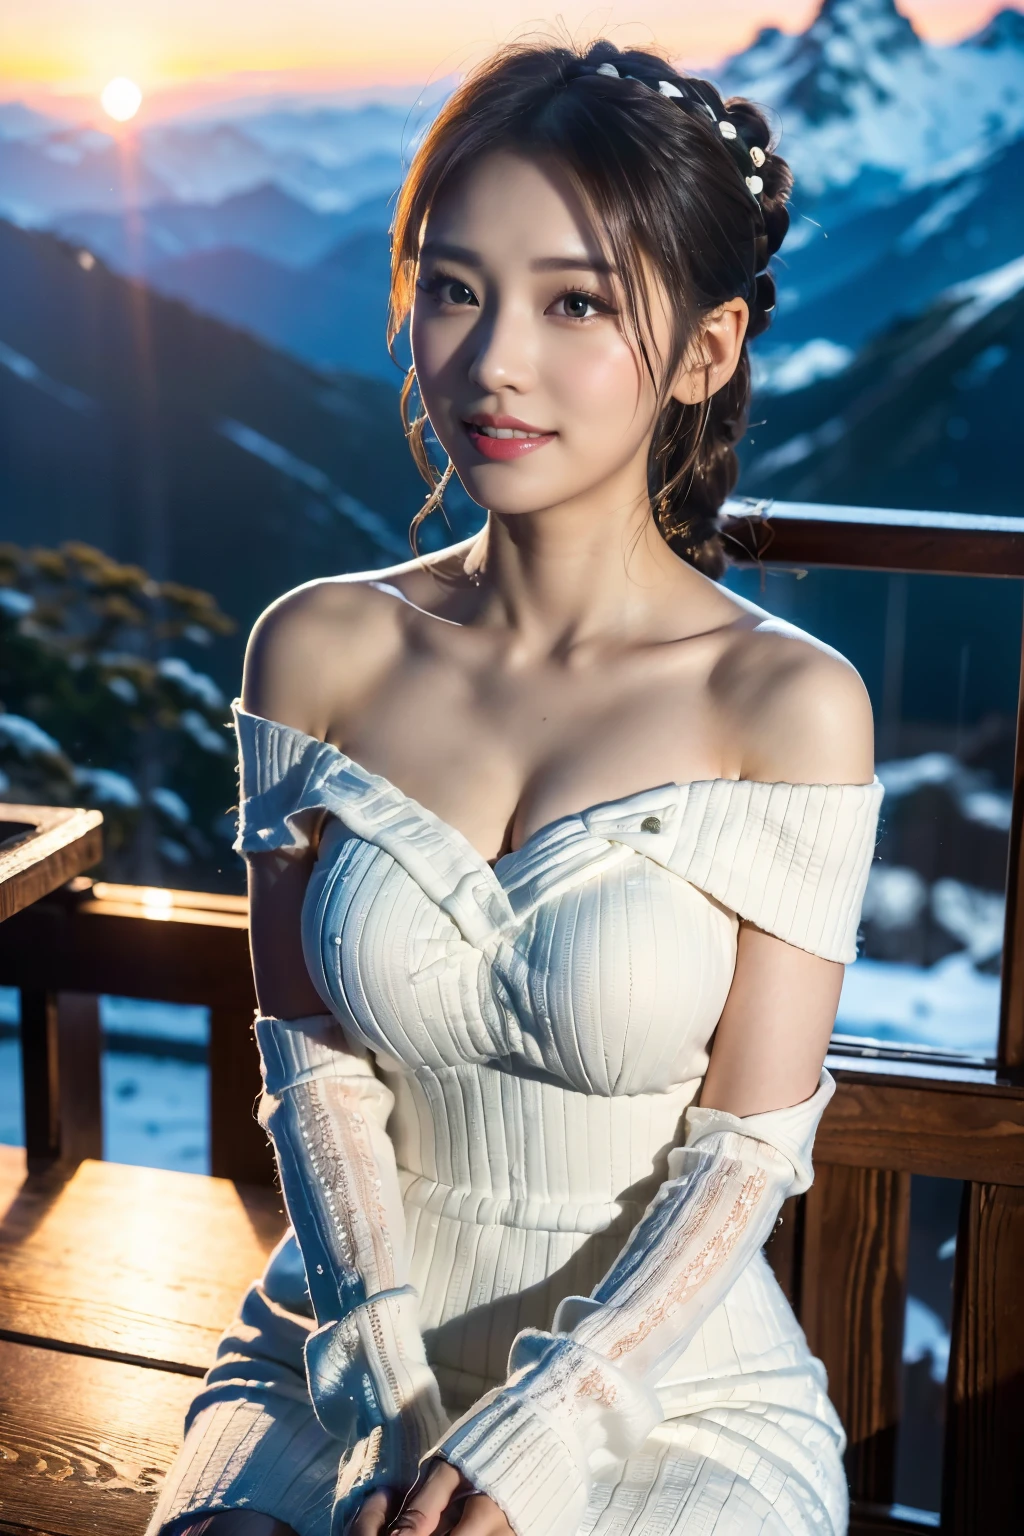 (Make your subject look three-dimensional with the contrast of light and shadow),(((With the sunset in the background))),(((Winter snowy mountain climbing scenery:1.3))),cute and beautiful adult woman,cute round face,cute smile,with blushing cheeks,red lips,(((Off-white off-shoulder knit tight dress:1.3))),black stockings,Knee-high boots,(silvery hair,floral braided headband,half up、floral braided space bun,voluminous fishtail braid,Twisted pan,),(The bangs are see-through bangs),hairpin,hair ornaments,(((emphasize the chest:1.3))),Breast flick,Detailed clothing characteristics,Detailed characteristics of hair,detailed facial features,(dynamic angle),(dynamic and sexy pose),professional lighting,cinematic light,(table top,highest quality,Ultra high resolution output image,) ,(8K quality,Depth of the bounds written,Anatomically accurate facial structure,),(sea art 2 mode:1.3),(Image mode Ultra HD,),(3D Realistic Photography:1.3)